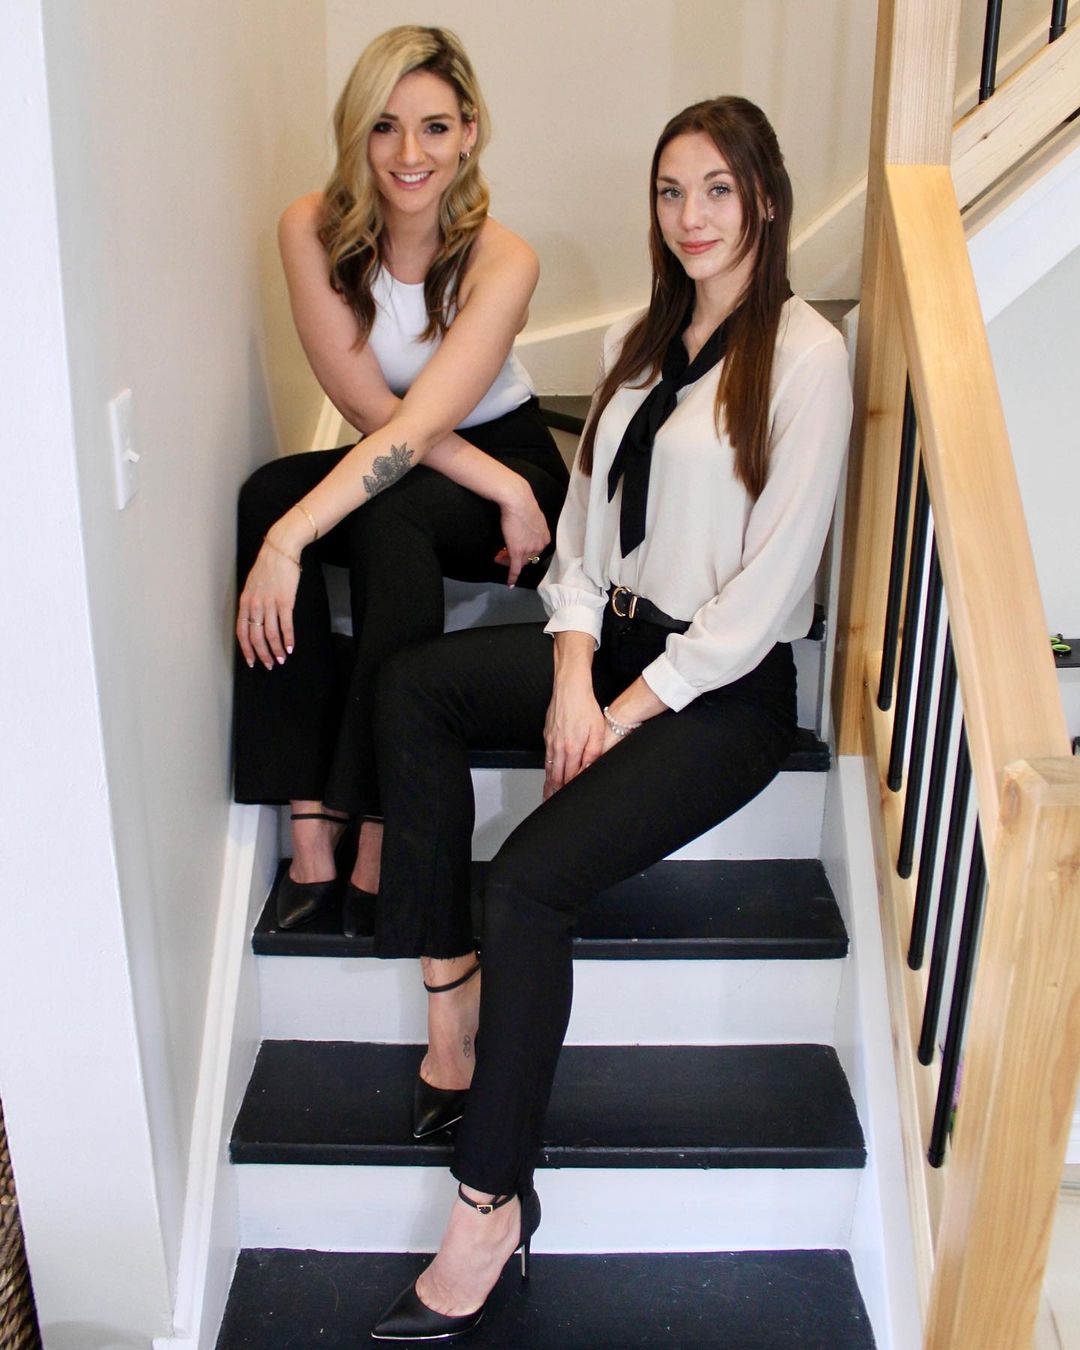 Amy Morgan has partnered with Haley Vink, licensed mortgage agent servicing London, ON